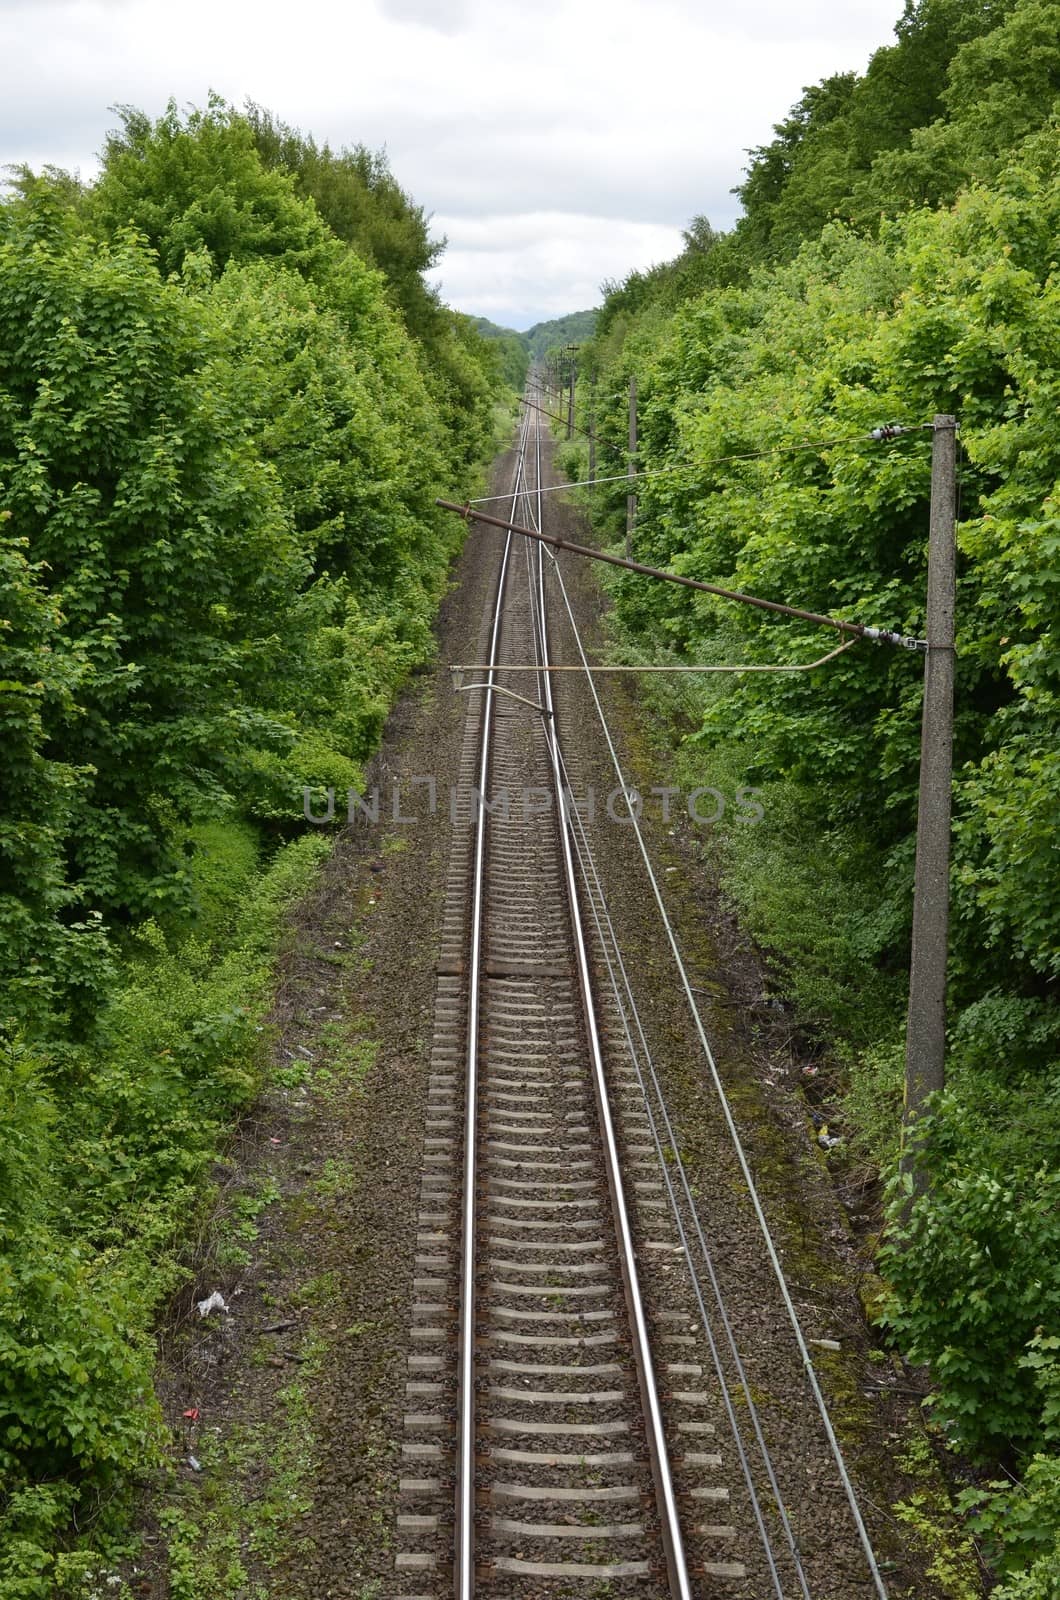 Railroad Tracks Leading Through The Forest.